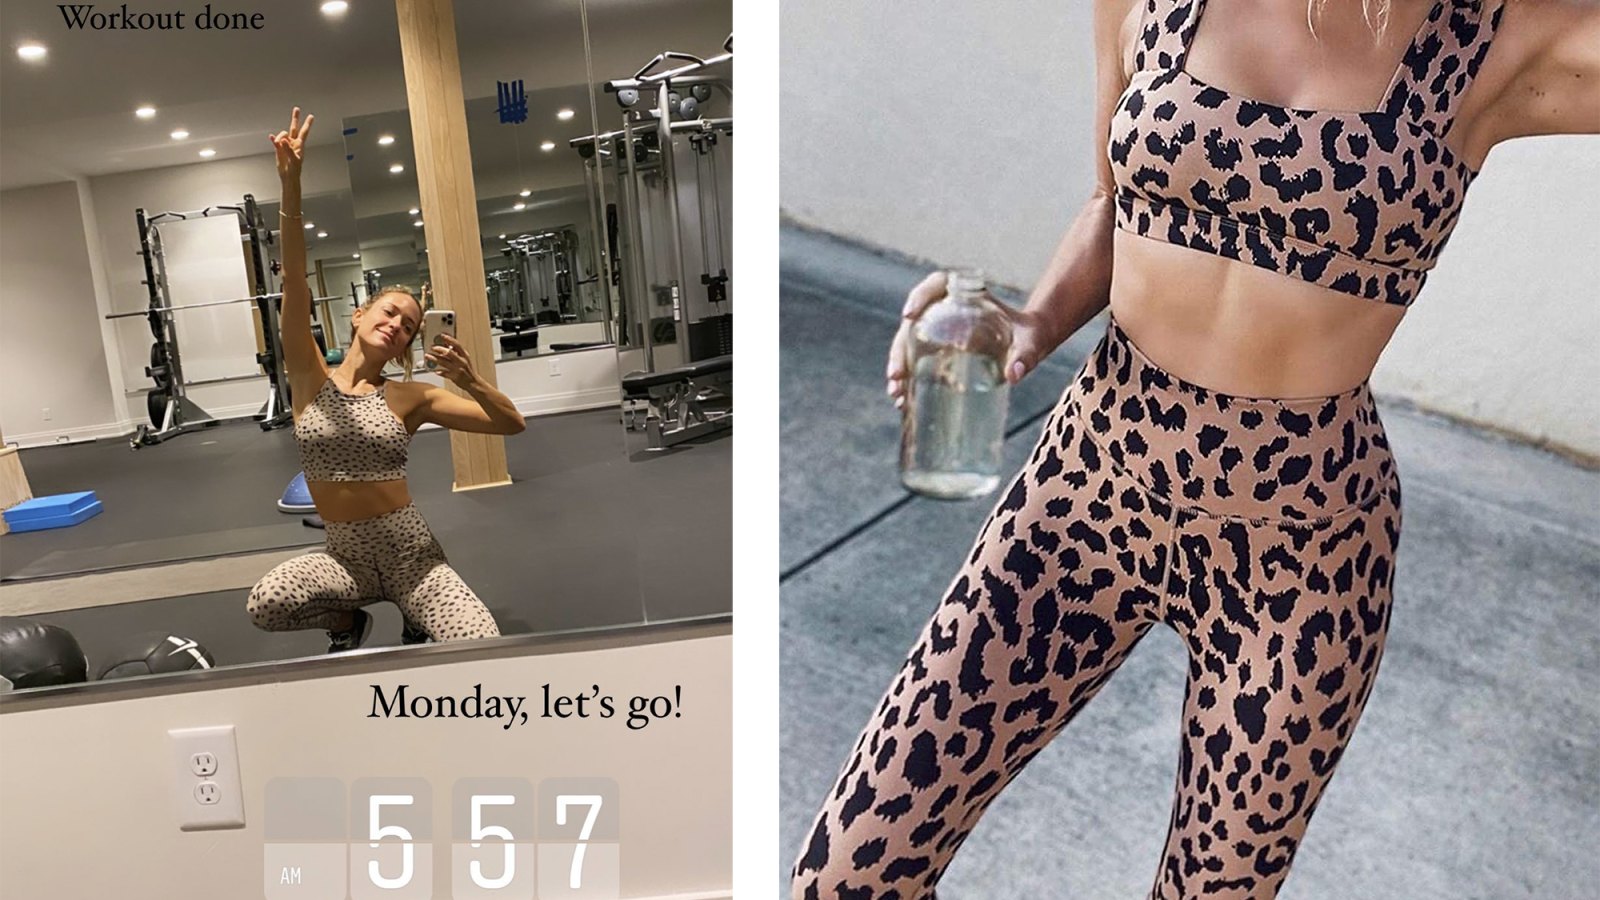 Kristin Cavallari's 5 A.M. Workout Look Inspired Us to Shop